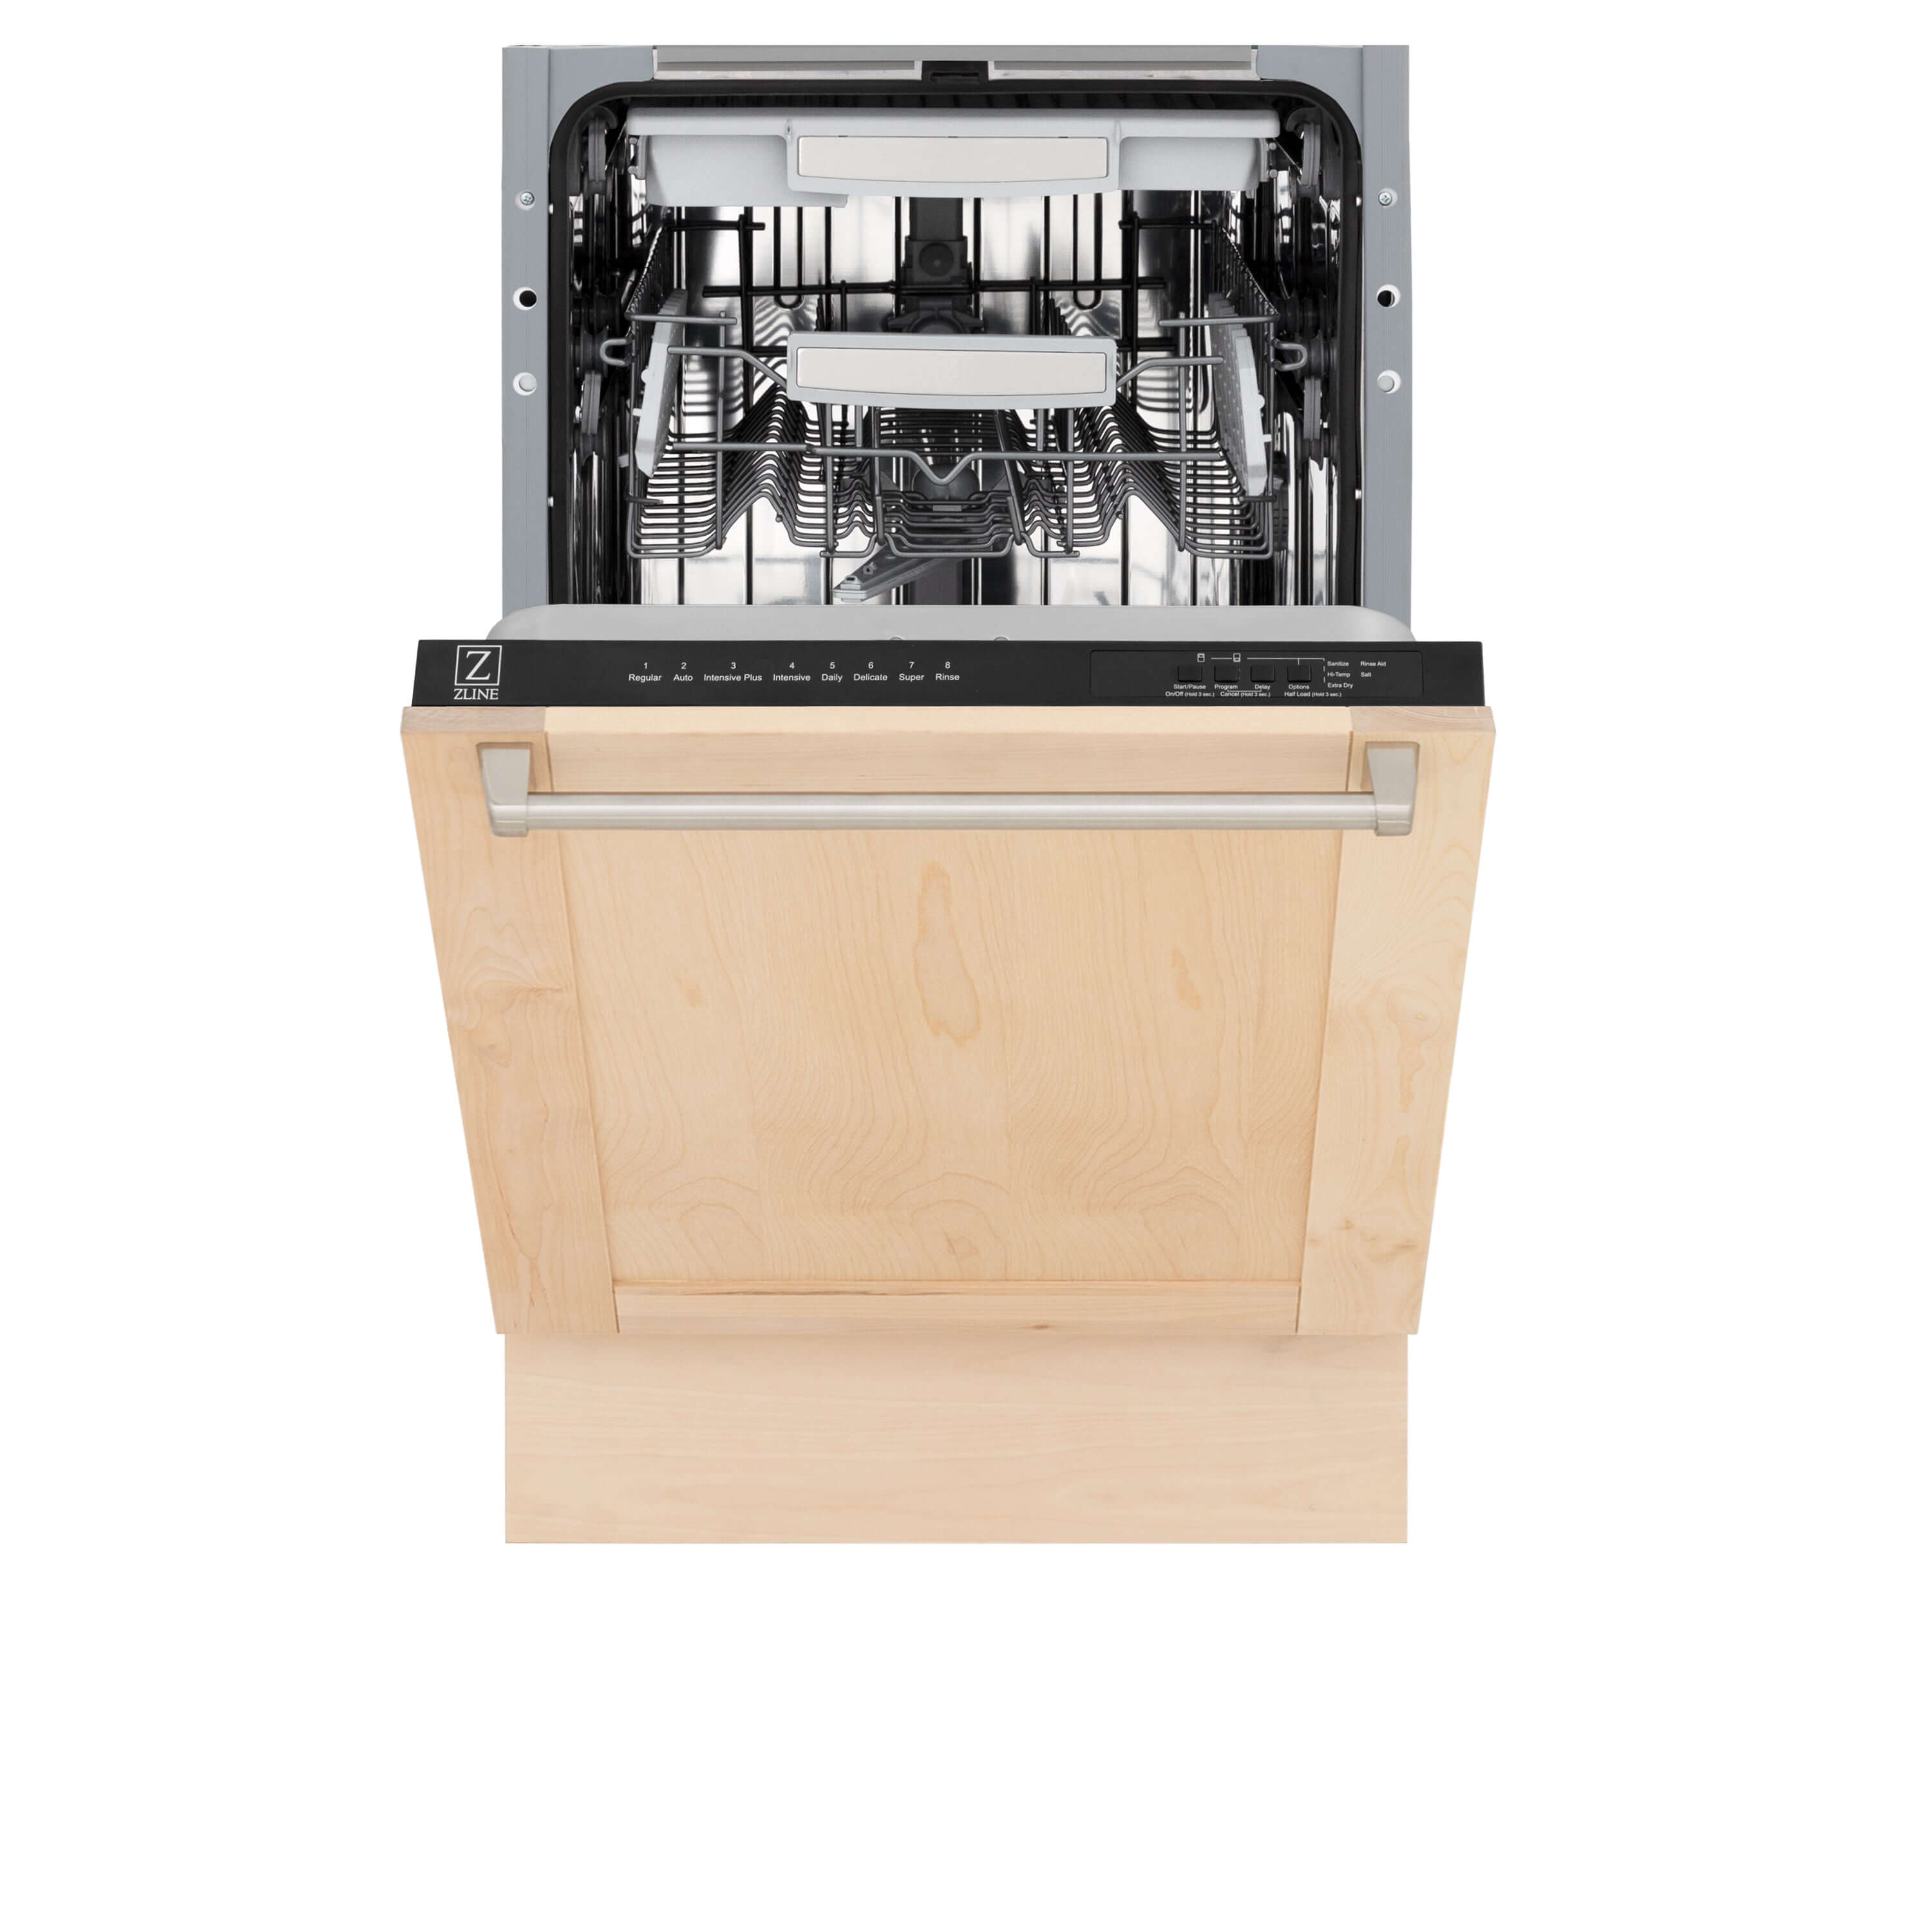 ZLINE 18 in. Tallac Series 3rd Rack Top Control Built-In Dishwasher in Unfinished Wood and Traditional Handle, 51dBa (DWV-UF-18) front, half open.